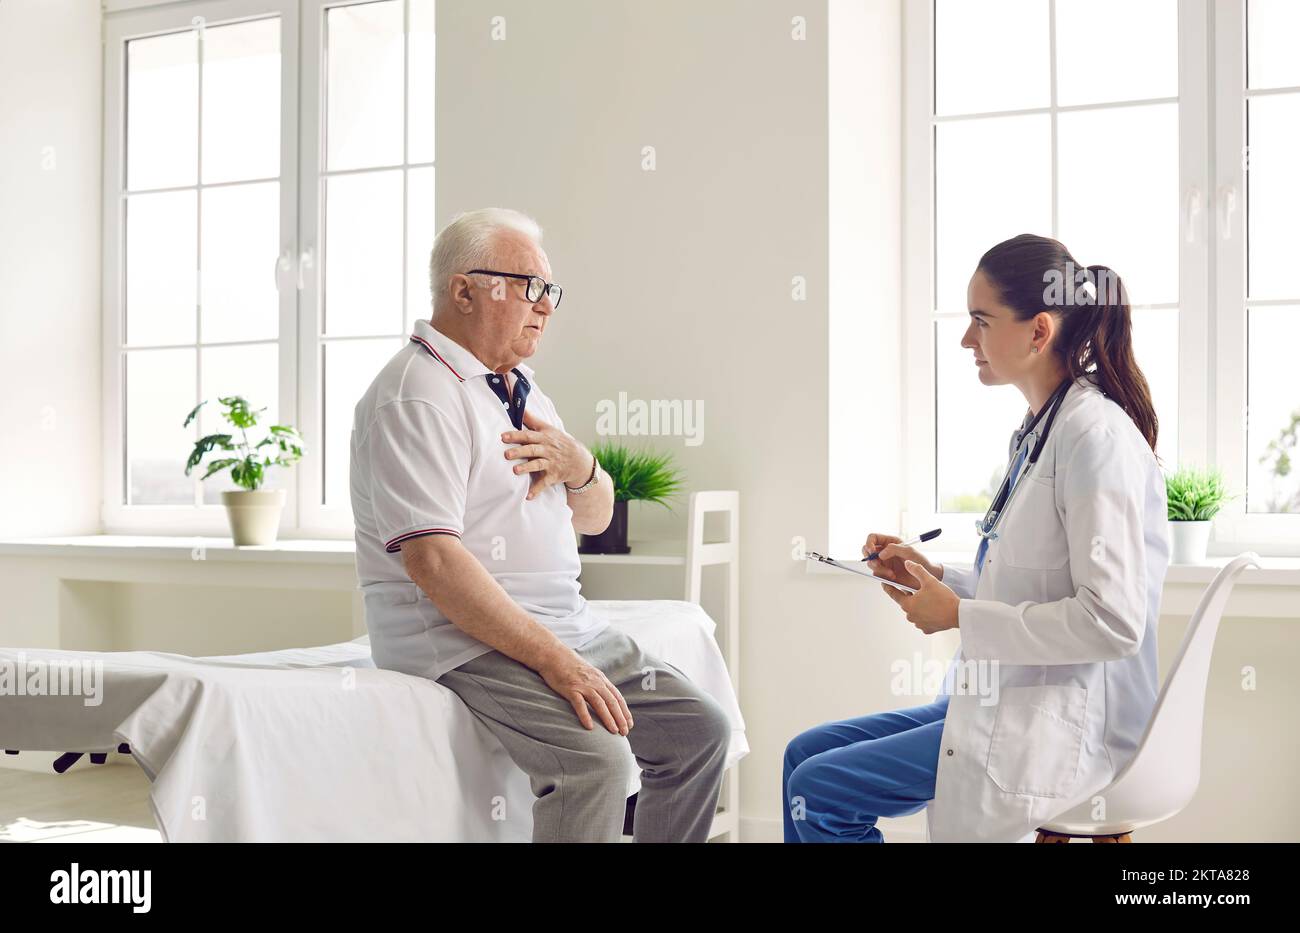 Agitated elderly man with glasses holds his hand on his chest, talking to a doctor in white coat. Stock Photo